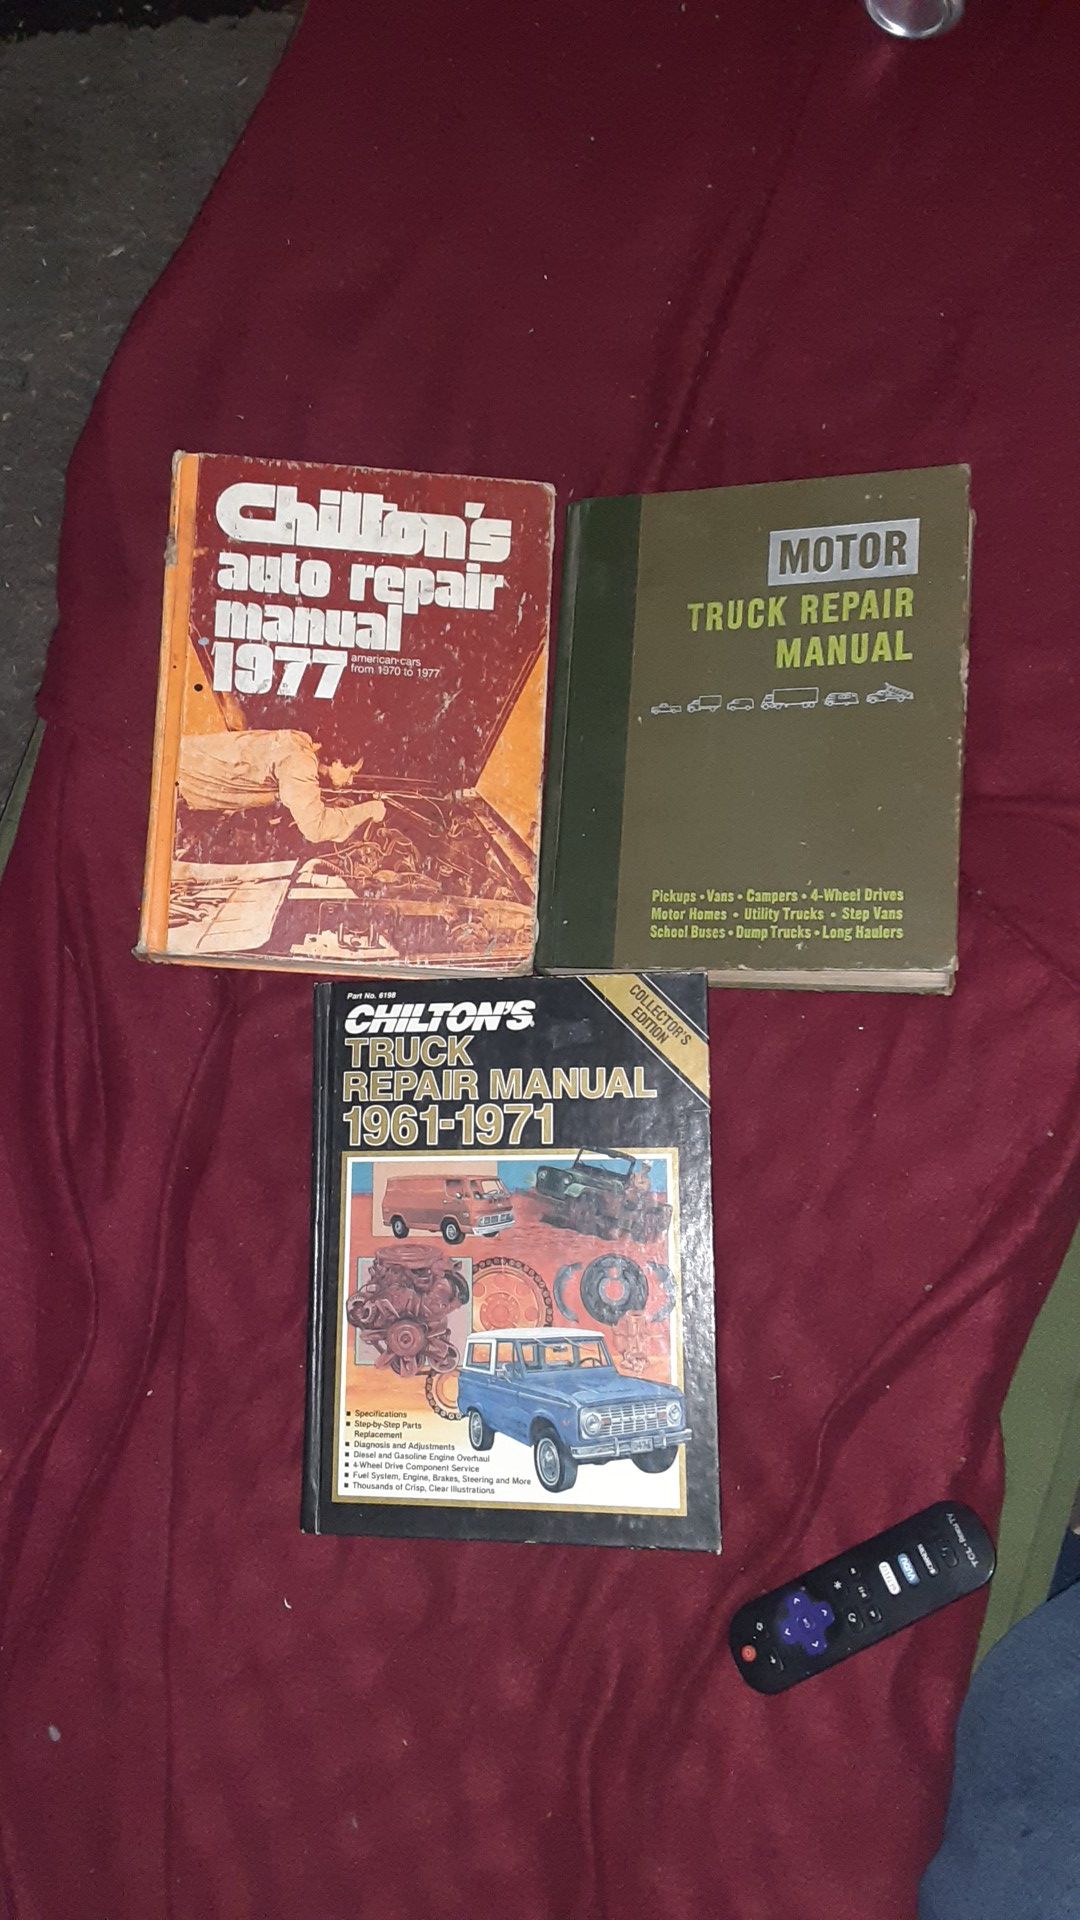 Oldest chilton I have is 1961 to 1971 truck repair manual I have two more that are also quite old